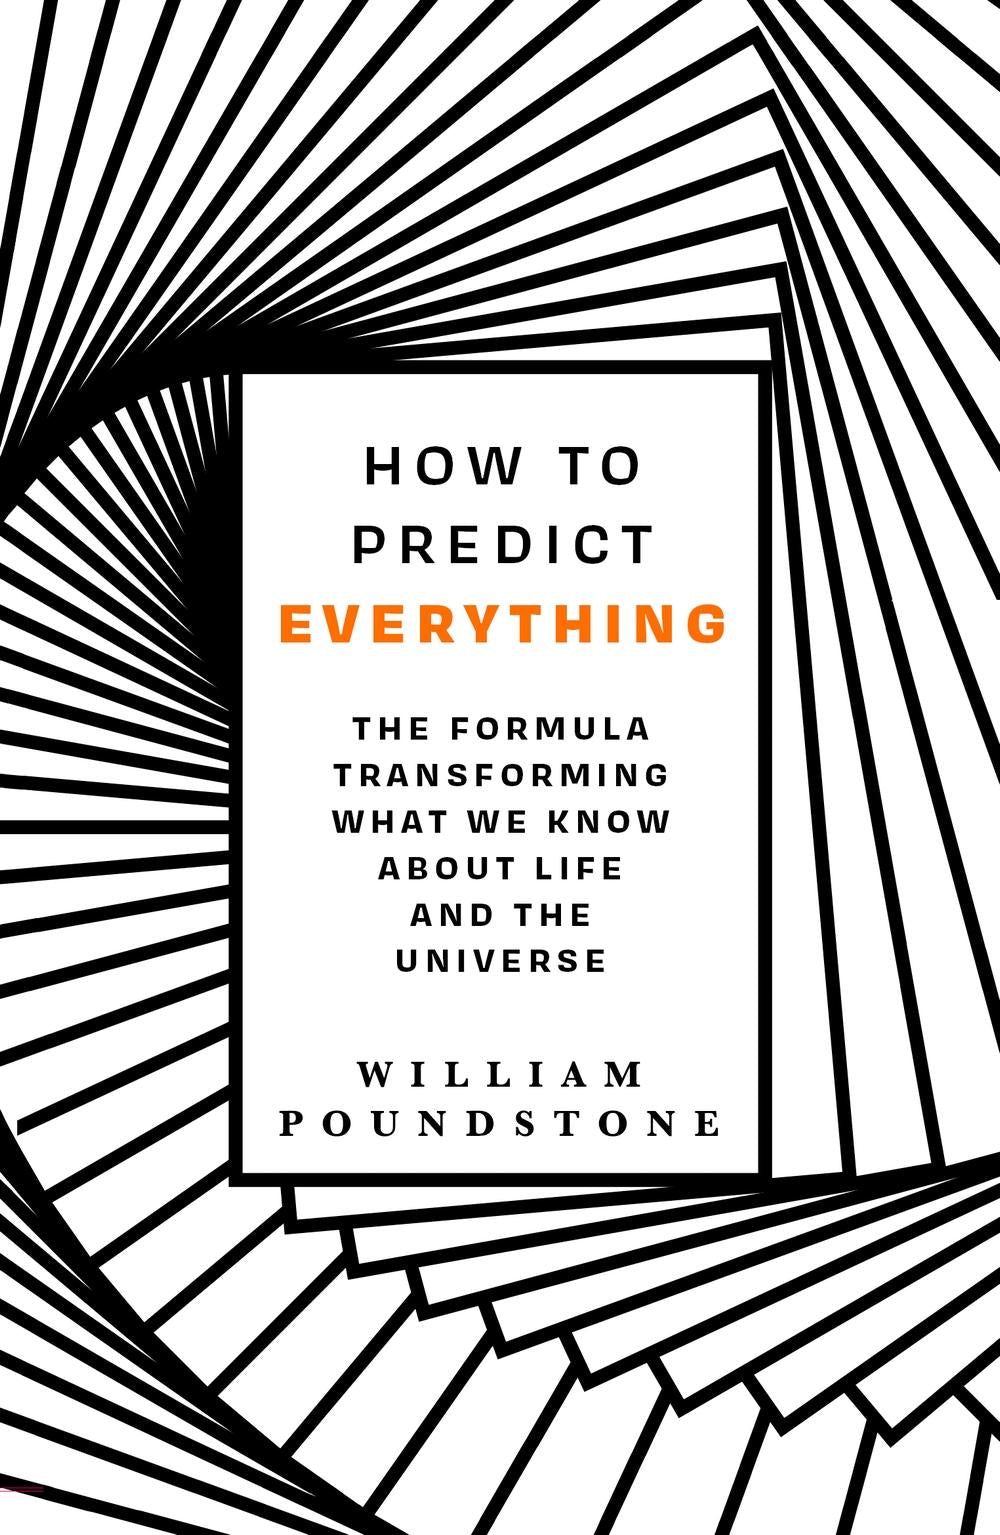 How to Predict Everything: The Formula Transforming What We Know About Life and